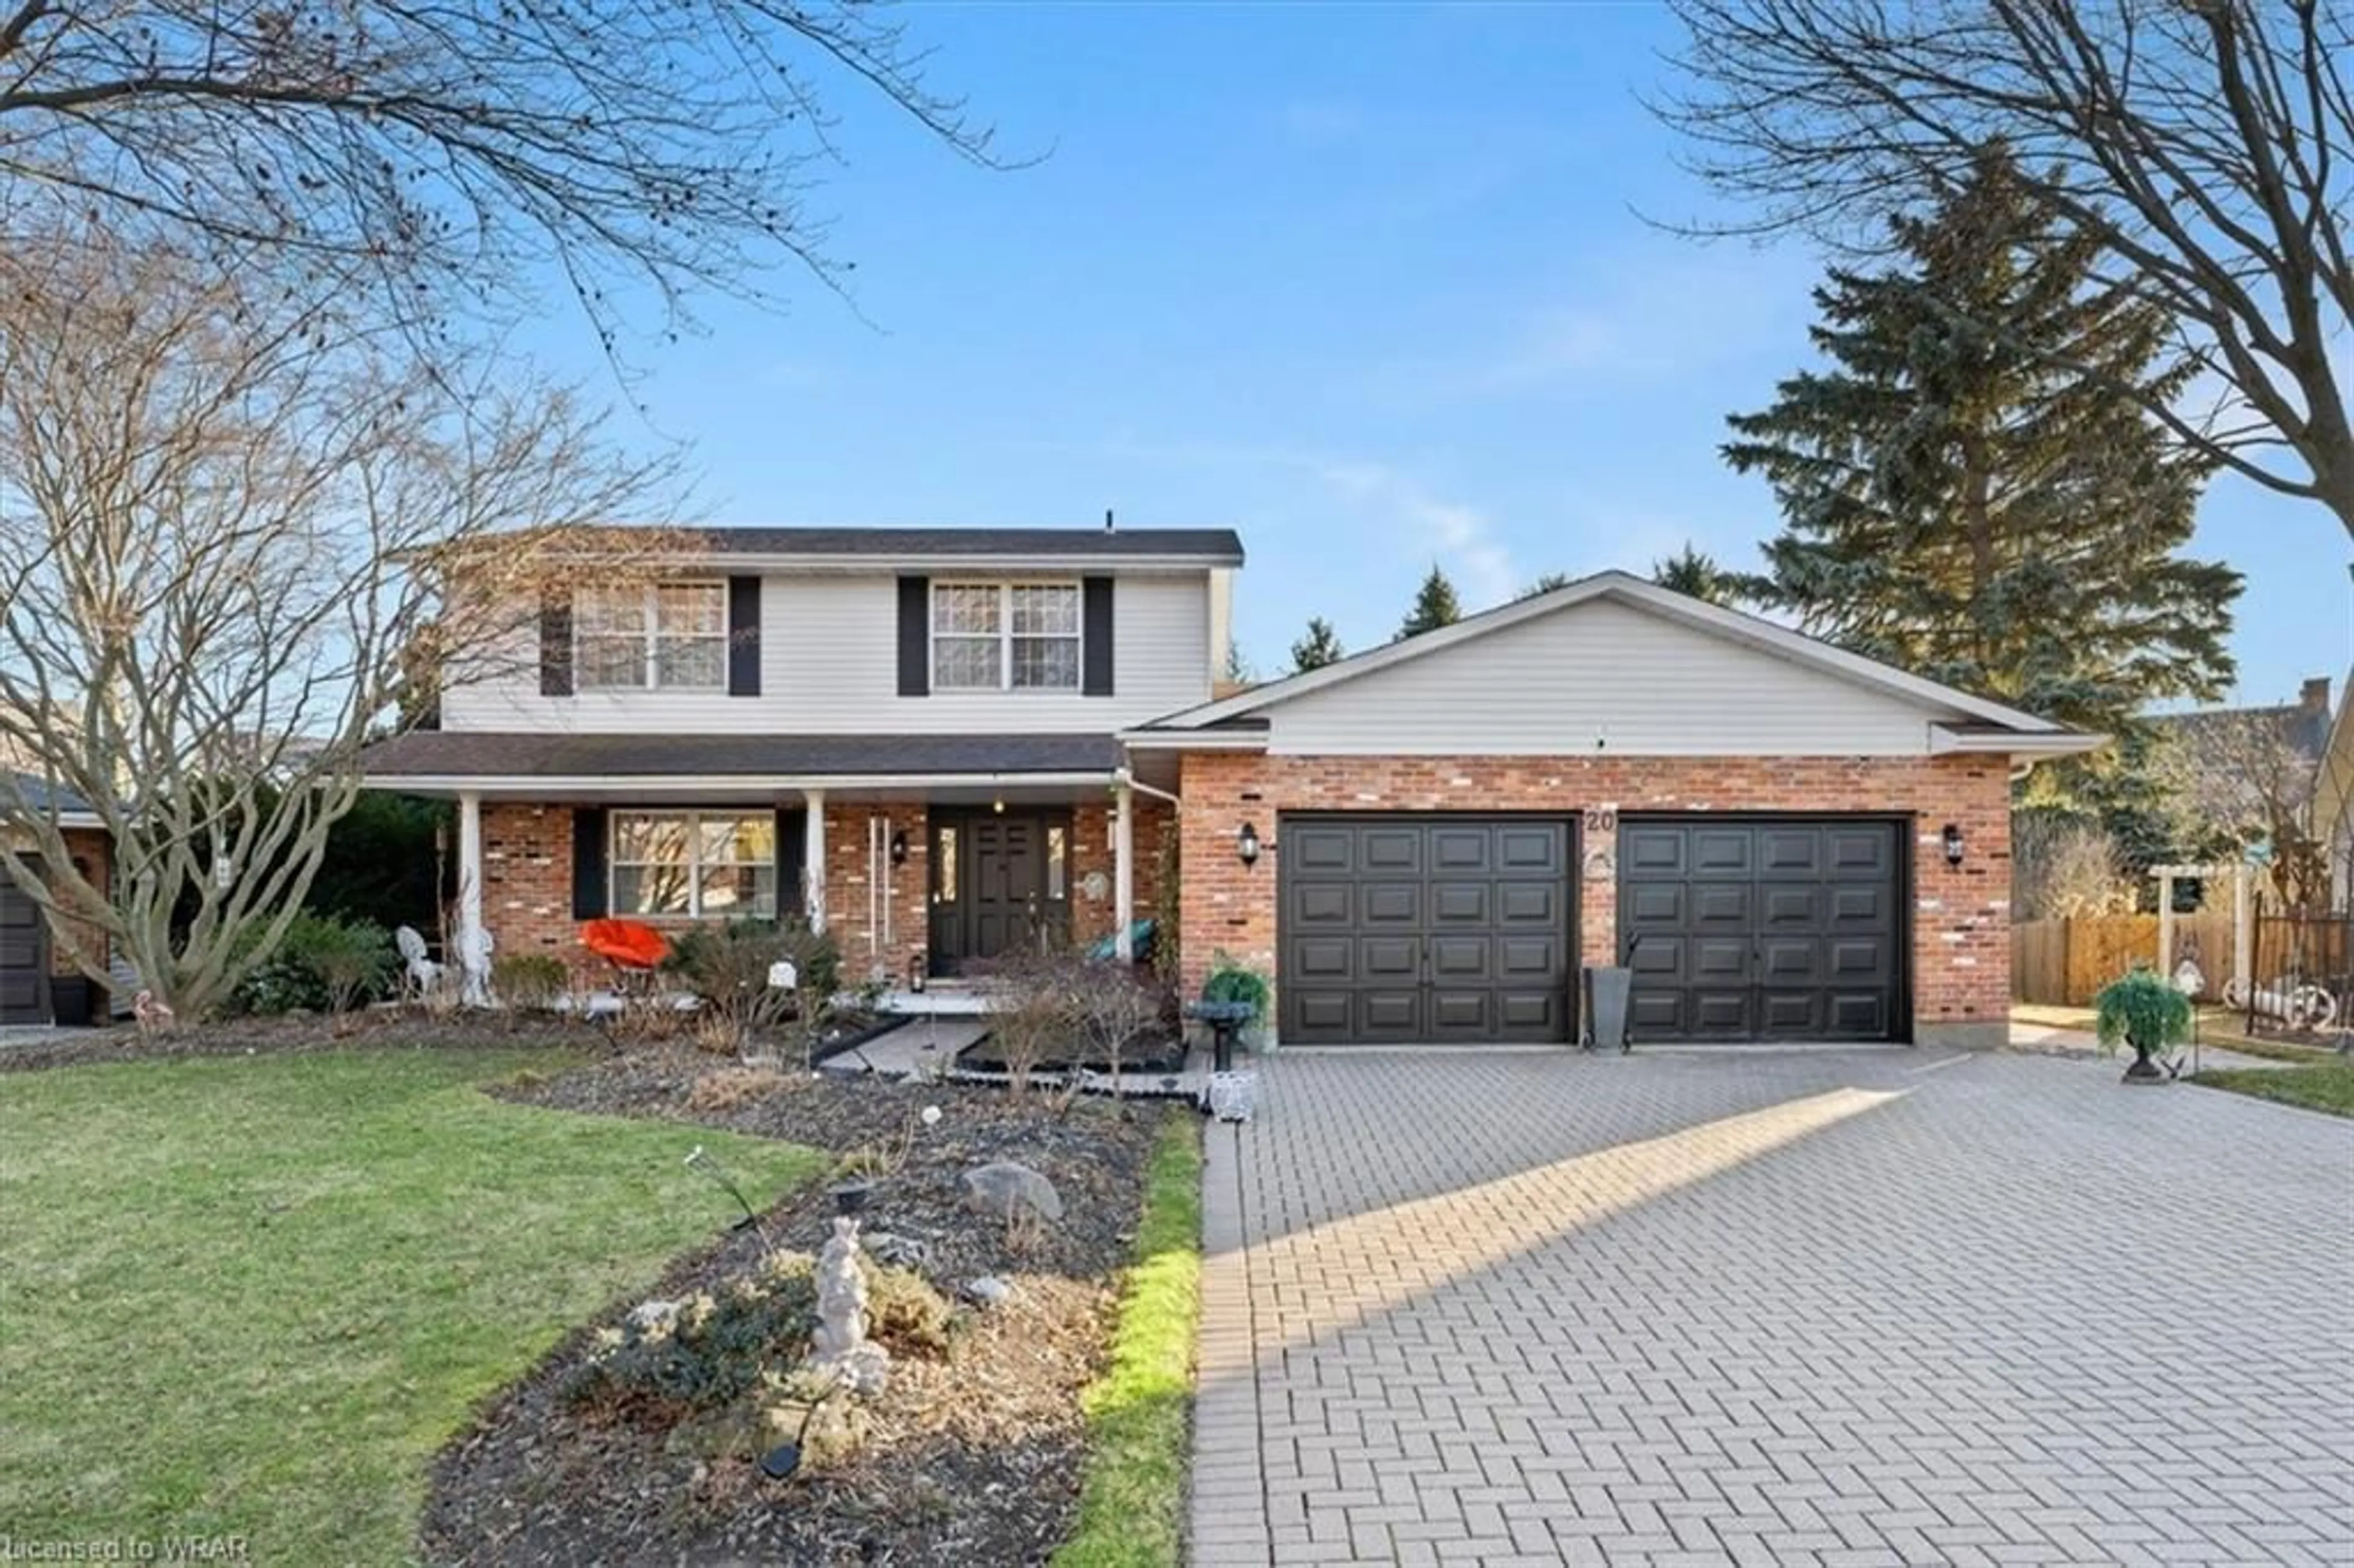 Home with brick exterior material for 20 Confederation Dr, Niagara-on-the-Lake Ontario L0S 1J0